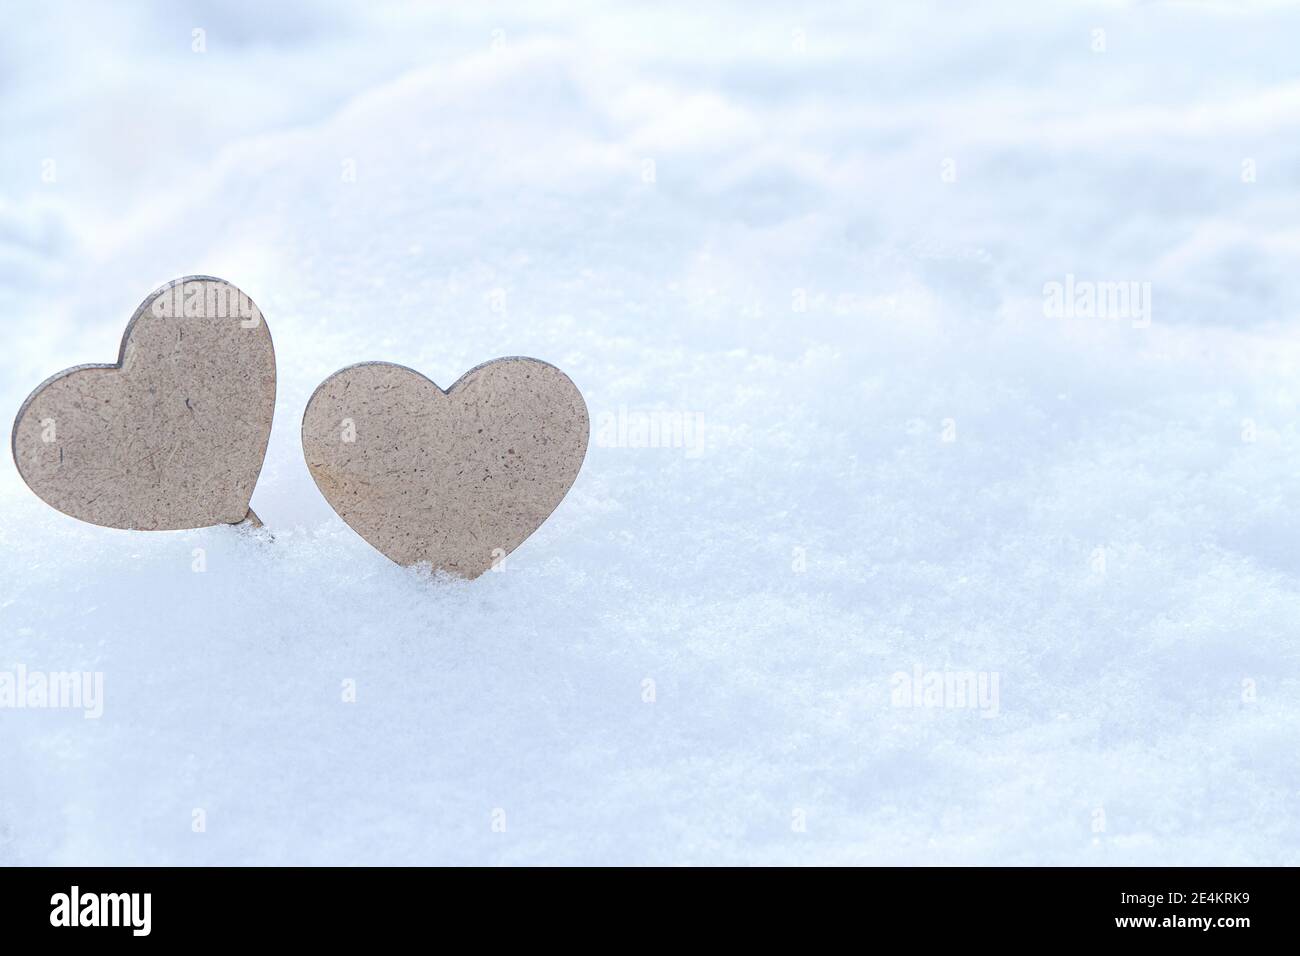 Couple hearts on snow background. St. Valentine's Day background. Stock Photo